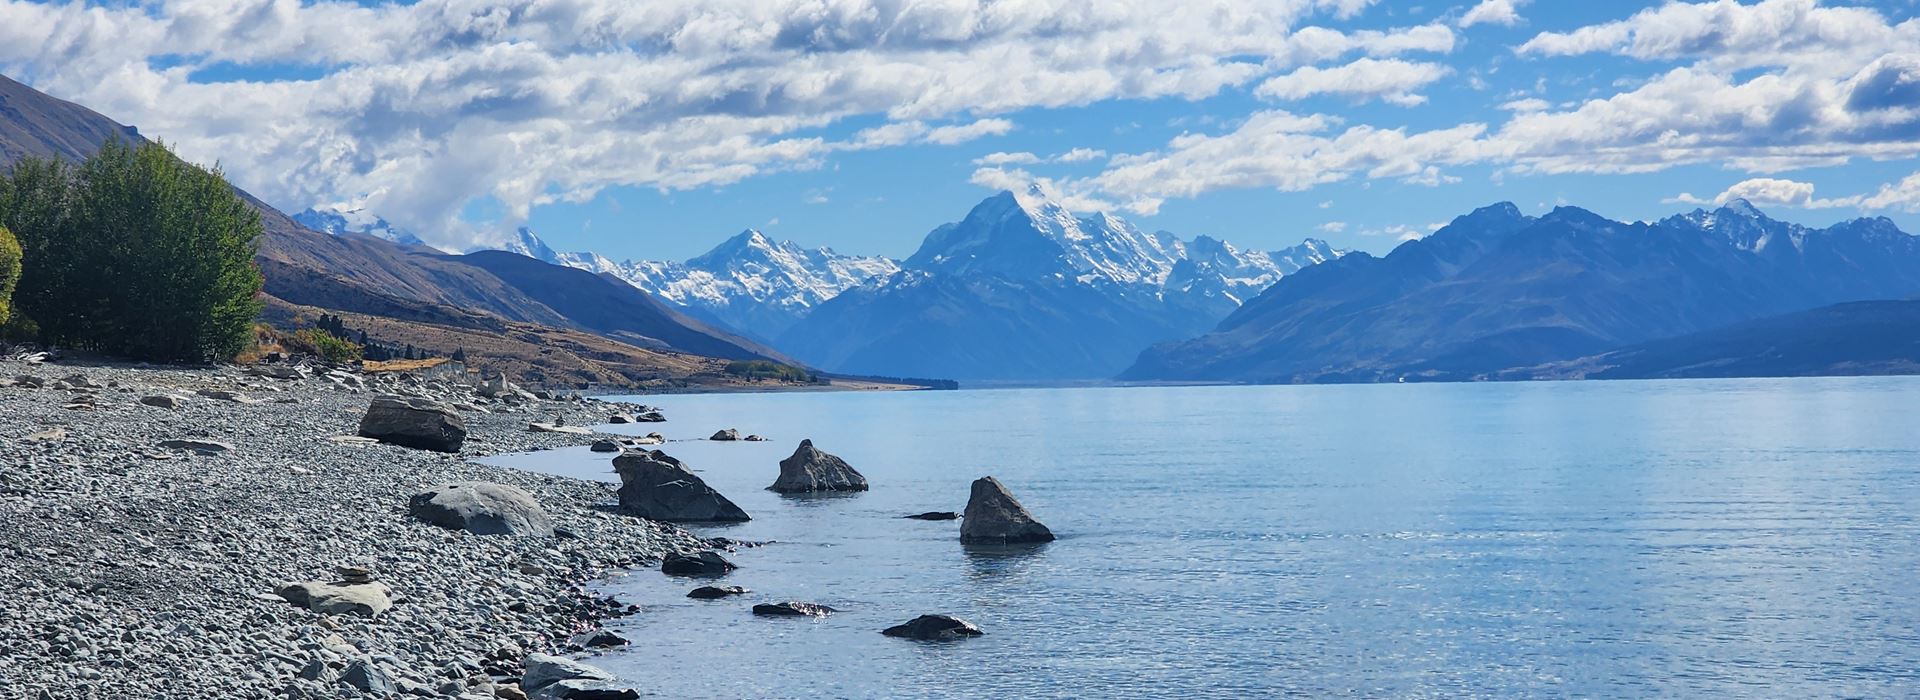 Luxury New Zealand Travel with your Private Guide